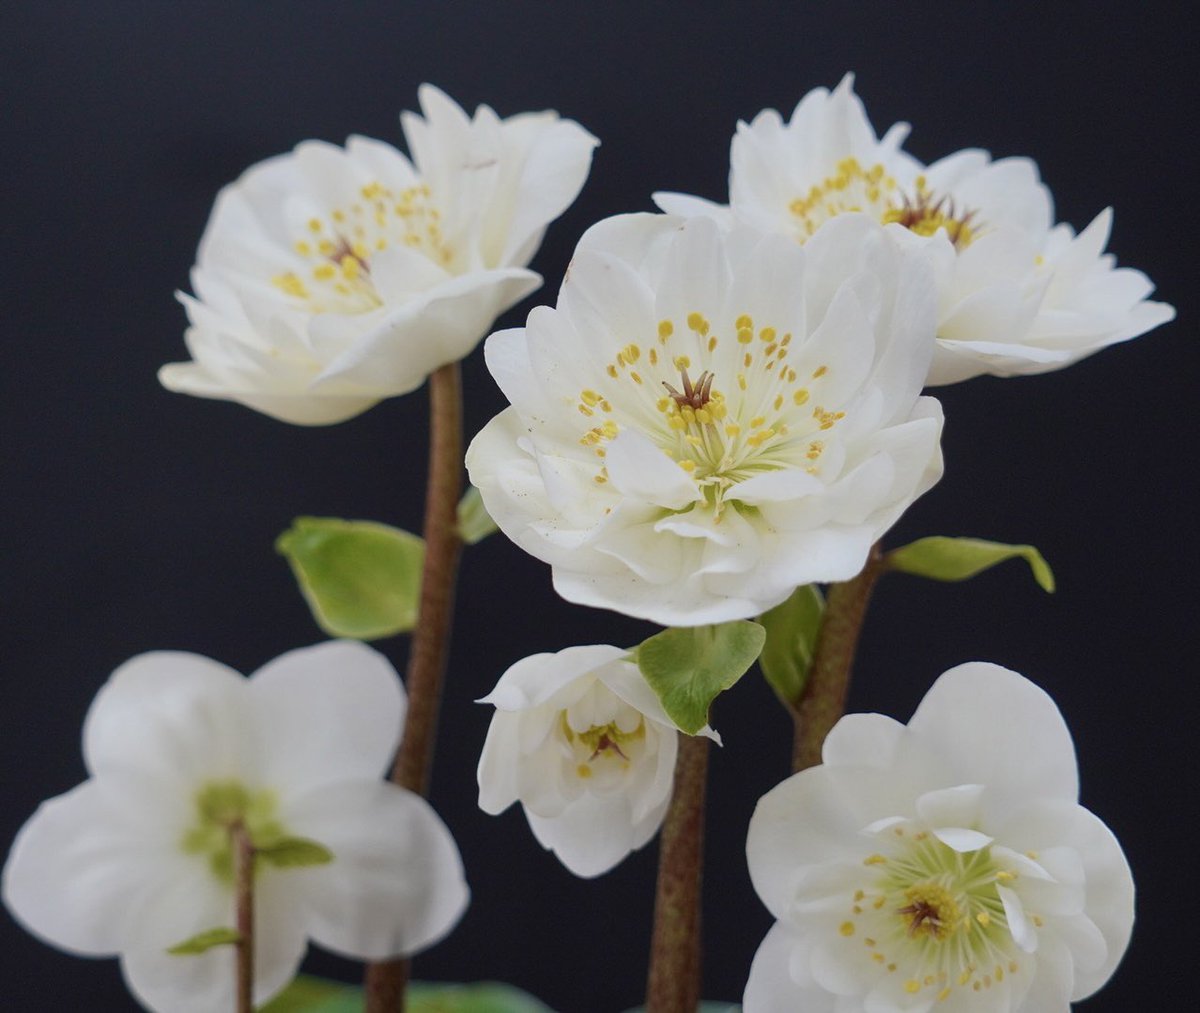 White Hellebore to cheer a wet and windy day. It’s from the @ashnurs collection 

#hellebores 
#perennialplants #gardens #sussexgardens